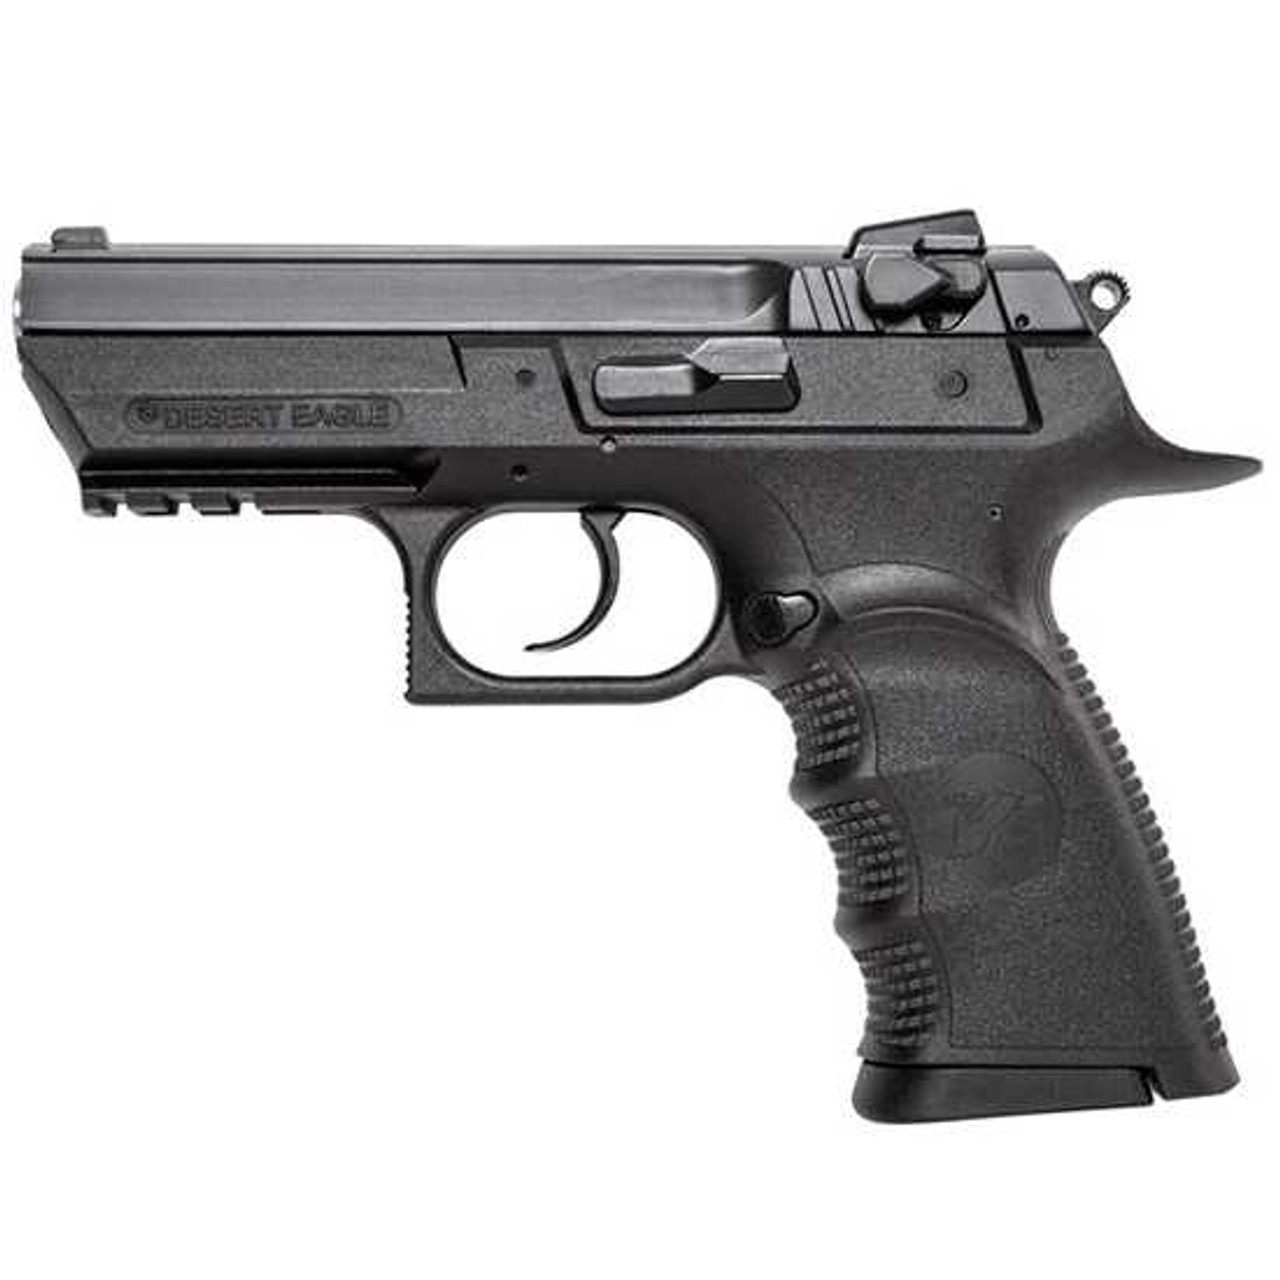 MR BABY EAGLE 9MM 3.85 SEMI-COMP POLY 15RD